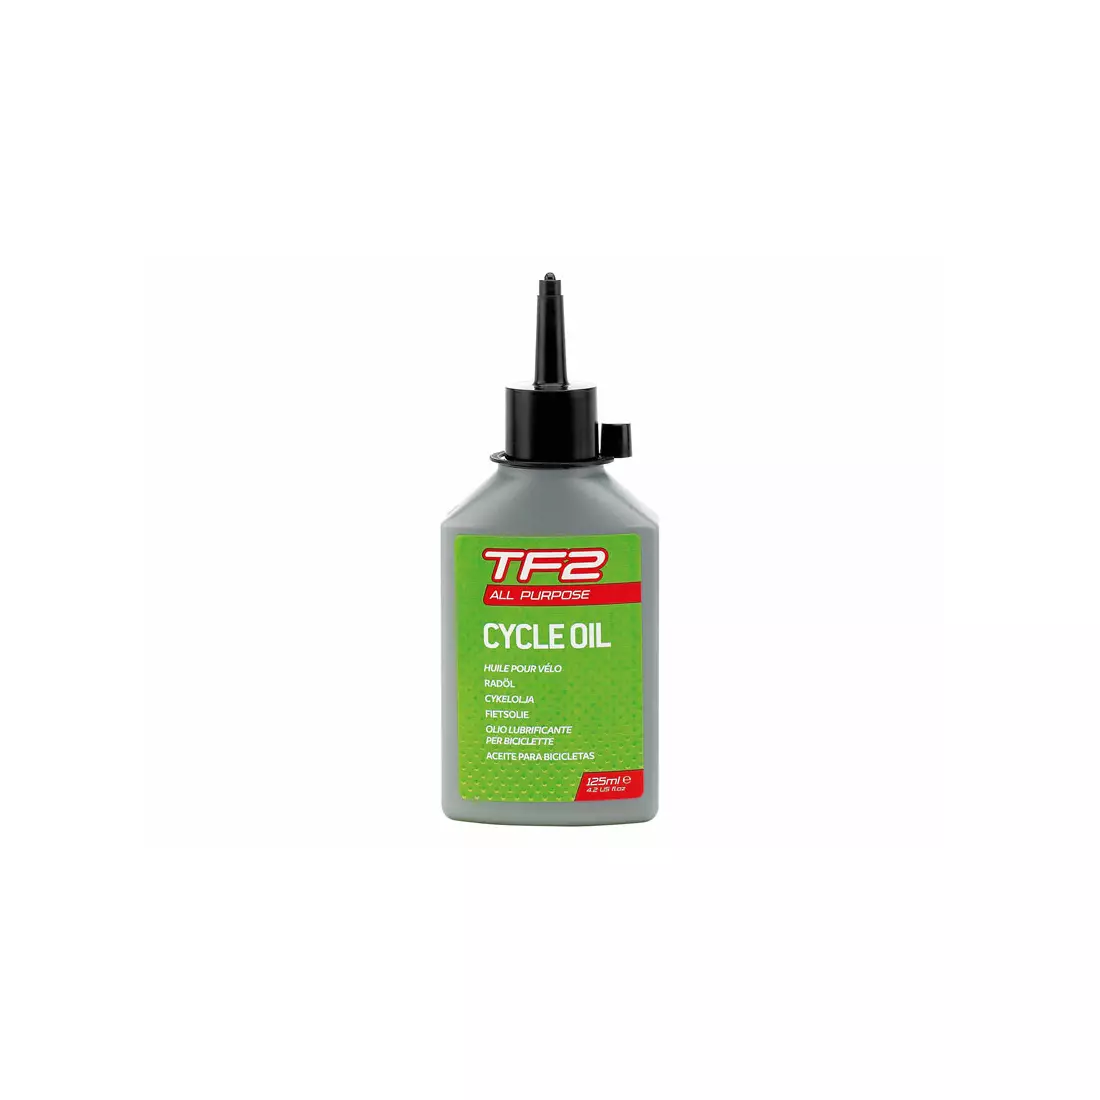 WELDTITE chain oil tf2 cycle oil all weather (dry and wet conditions) 125ml WLD-3001